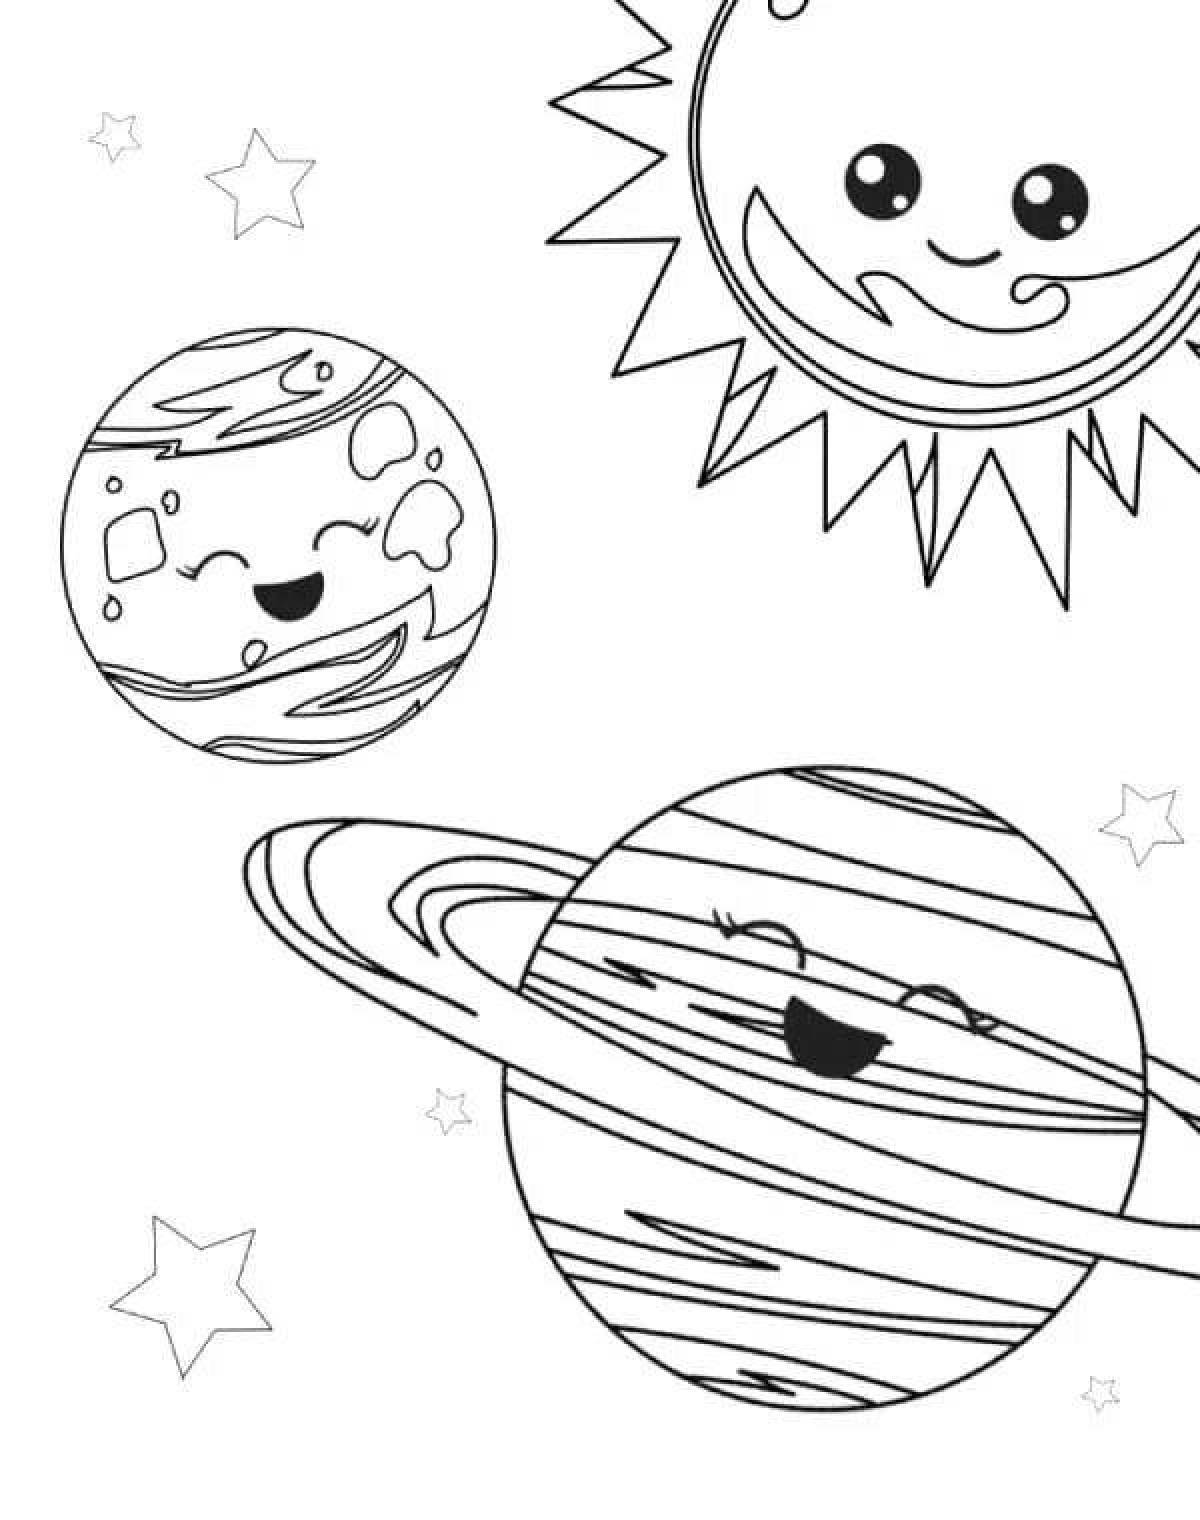 Coloring book gorgeous universe